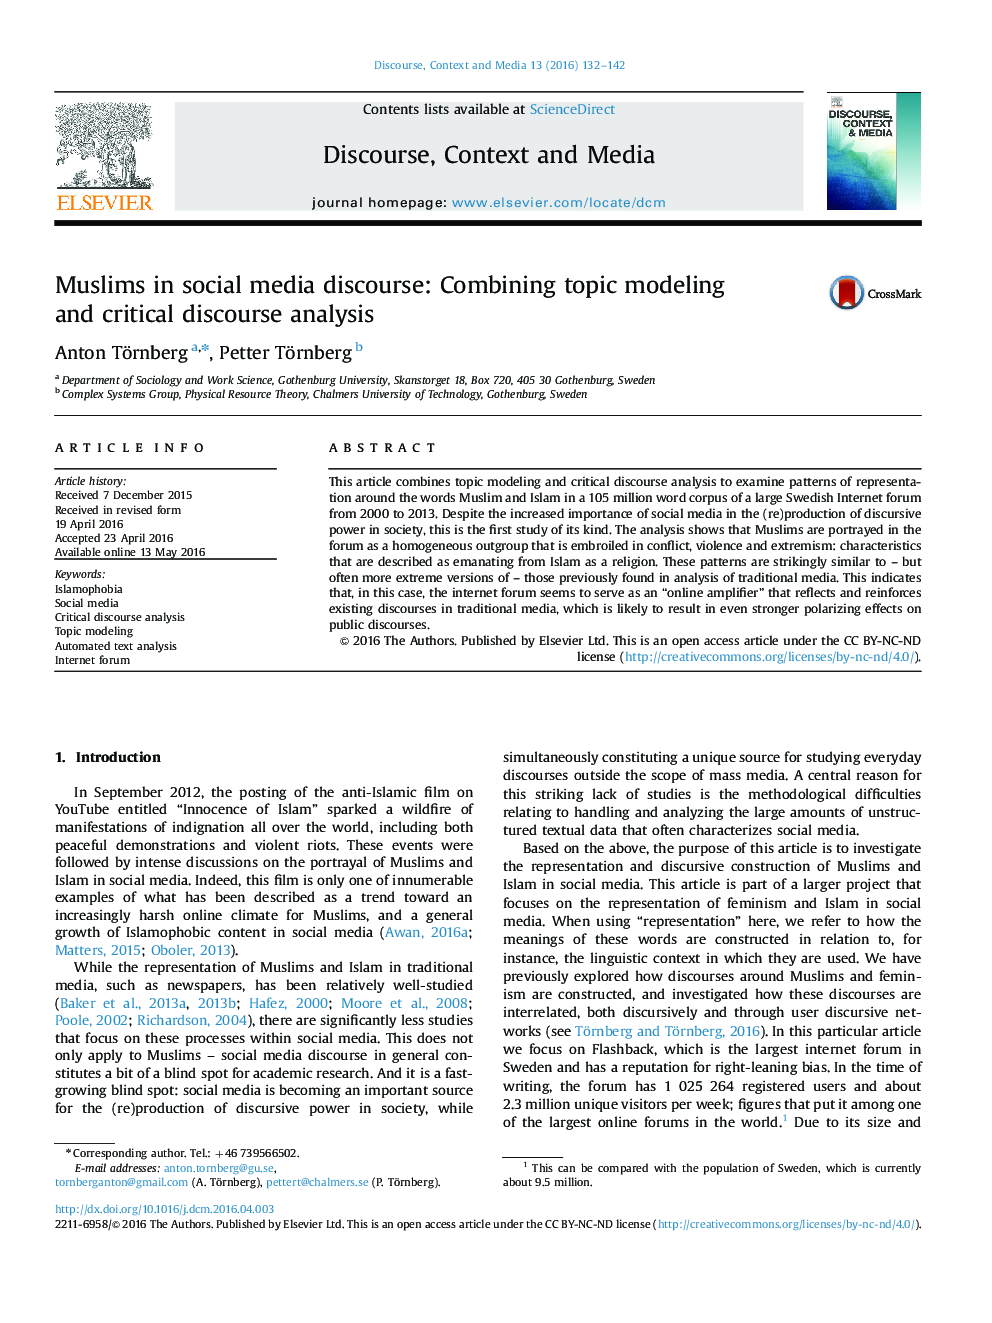 Muslims in social media discourse: Combining topic modeling and critical discourse analysis